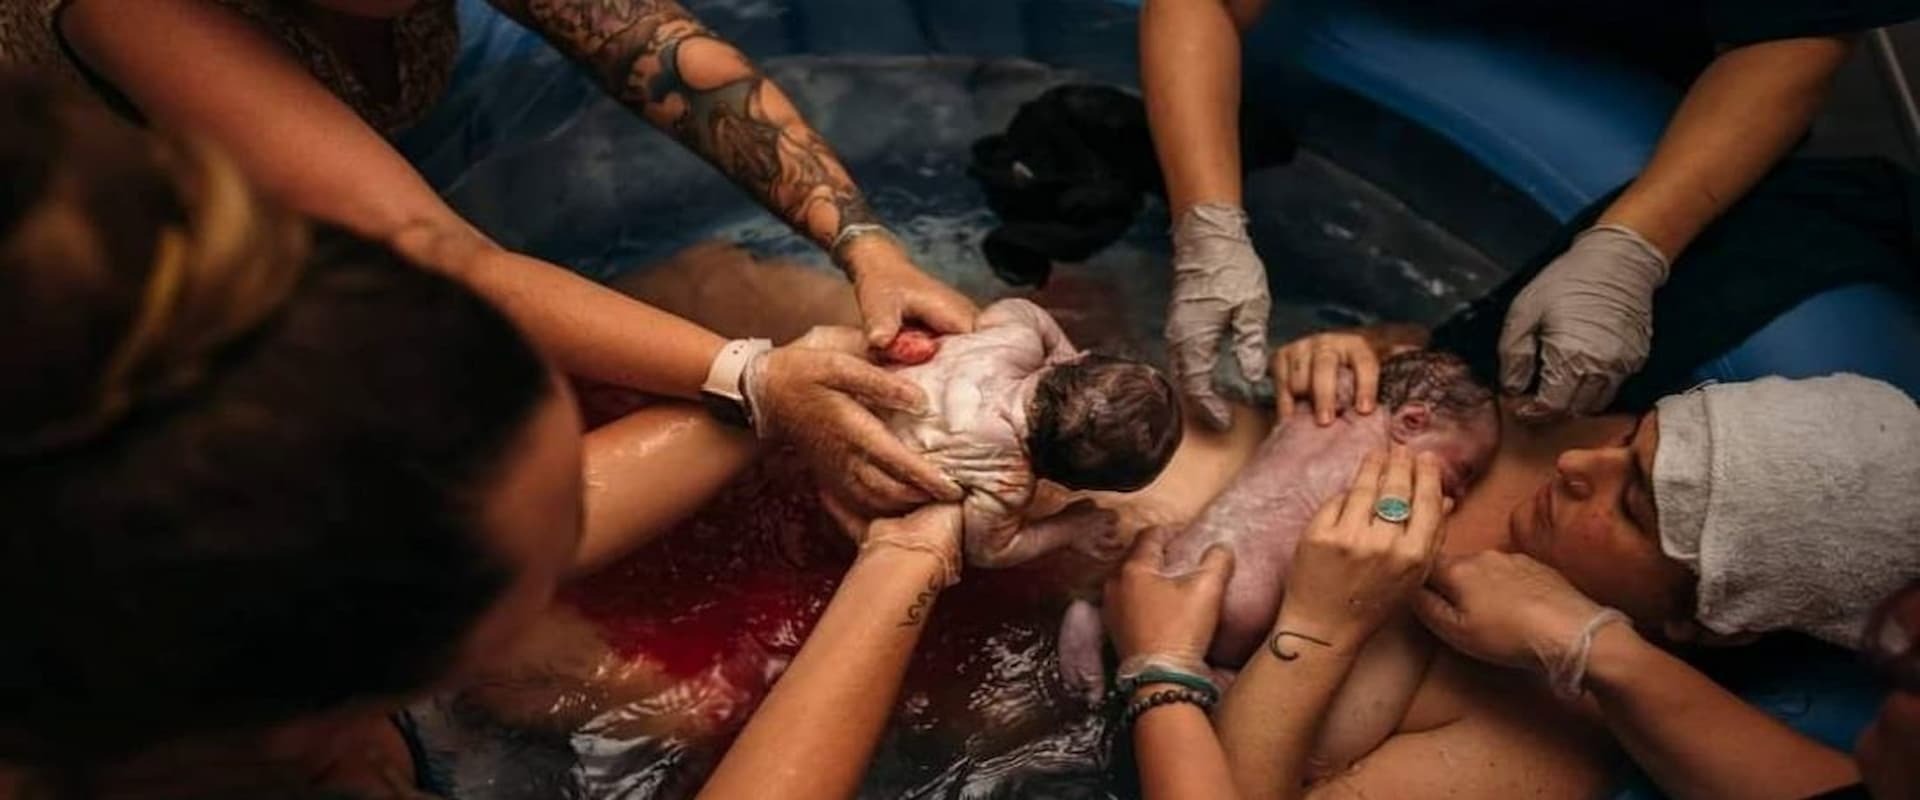 two babies being born water birth with helping hands surrounding the mother in the tub